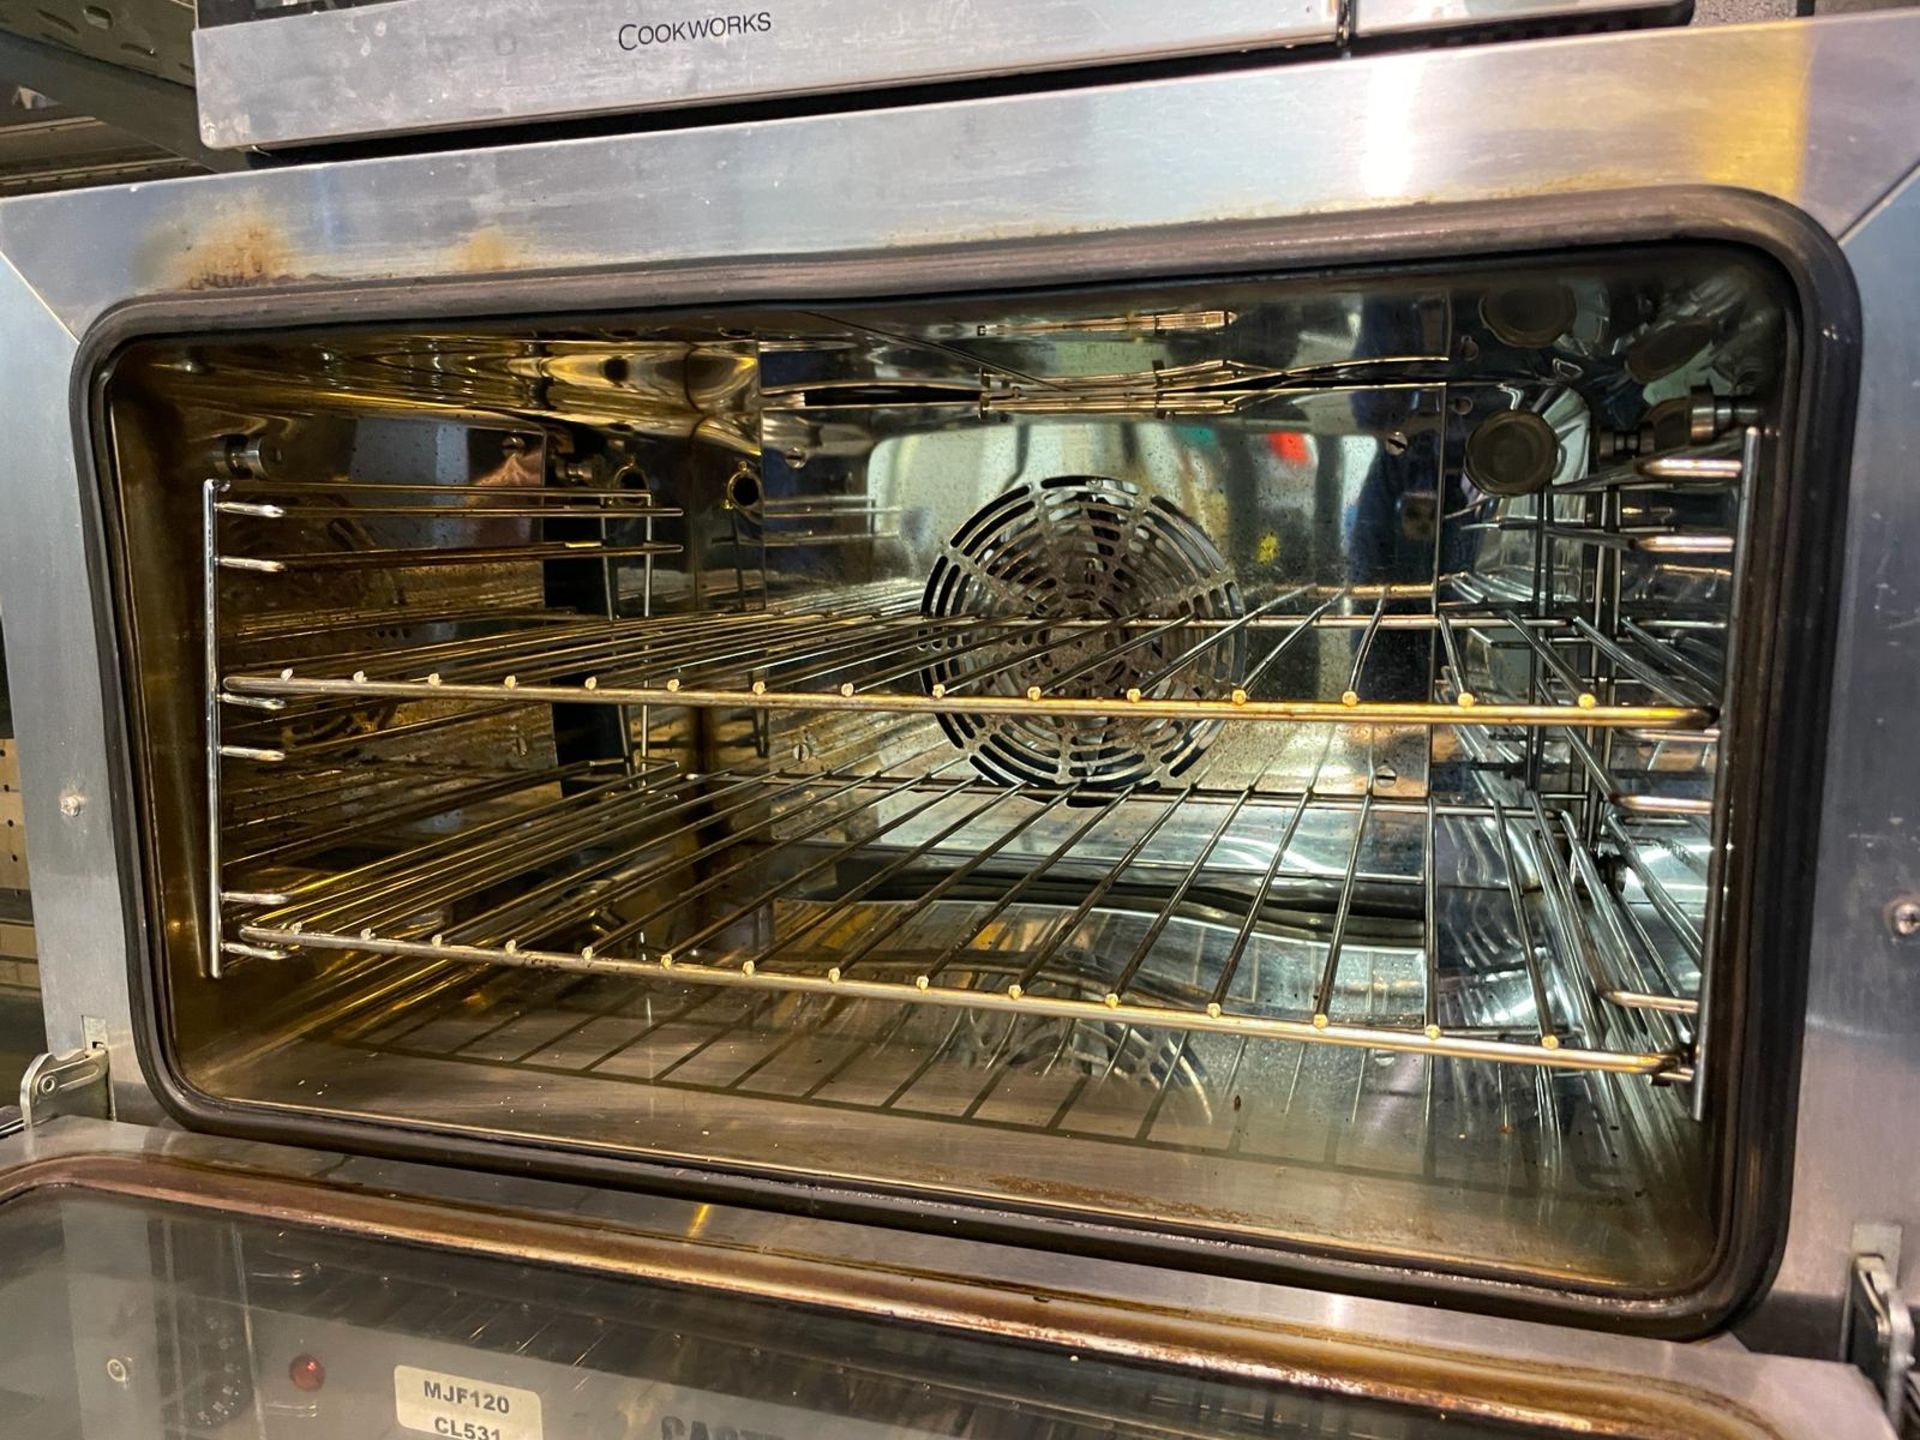 1 x Gastrotek Countertop Commercial Oven With a Stainless Steel Finish - Image 3 of 5